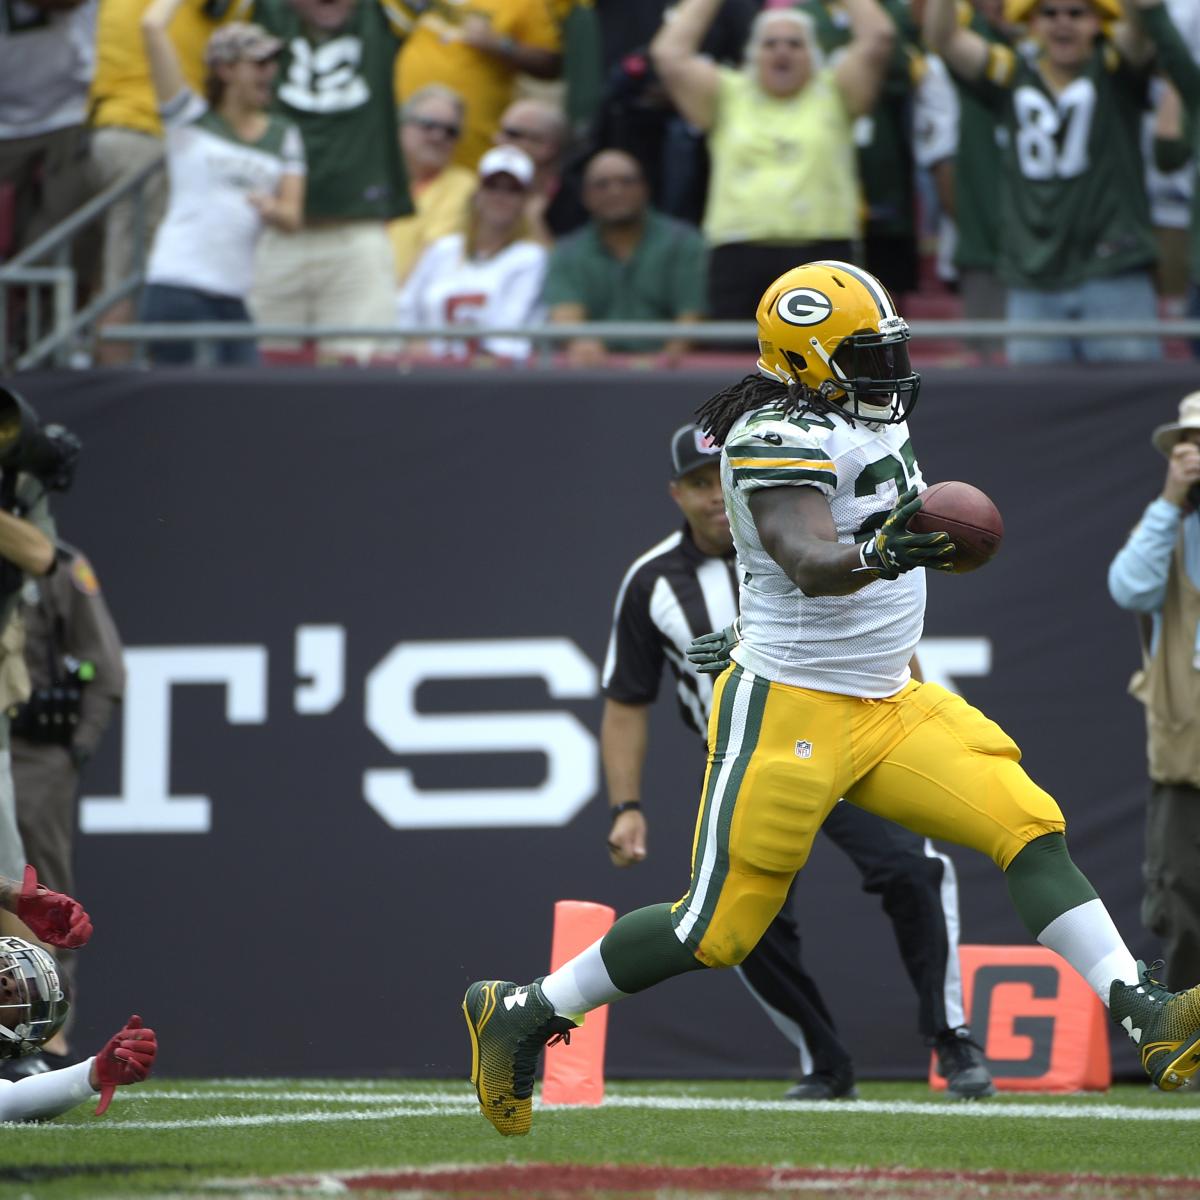 Fantasy 5: Can Eddie Lacy have a bounce-back season?